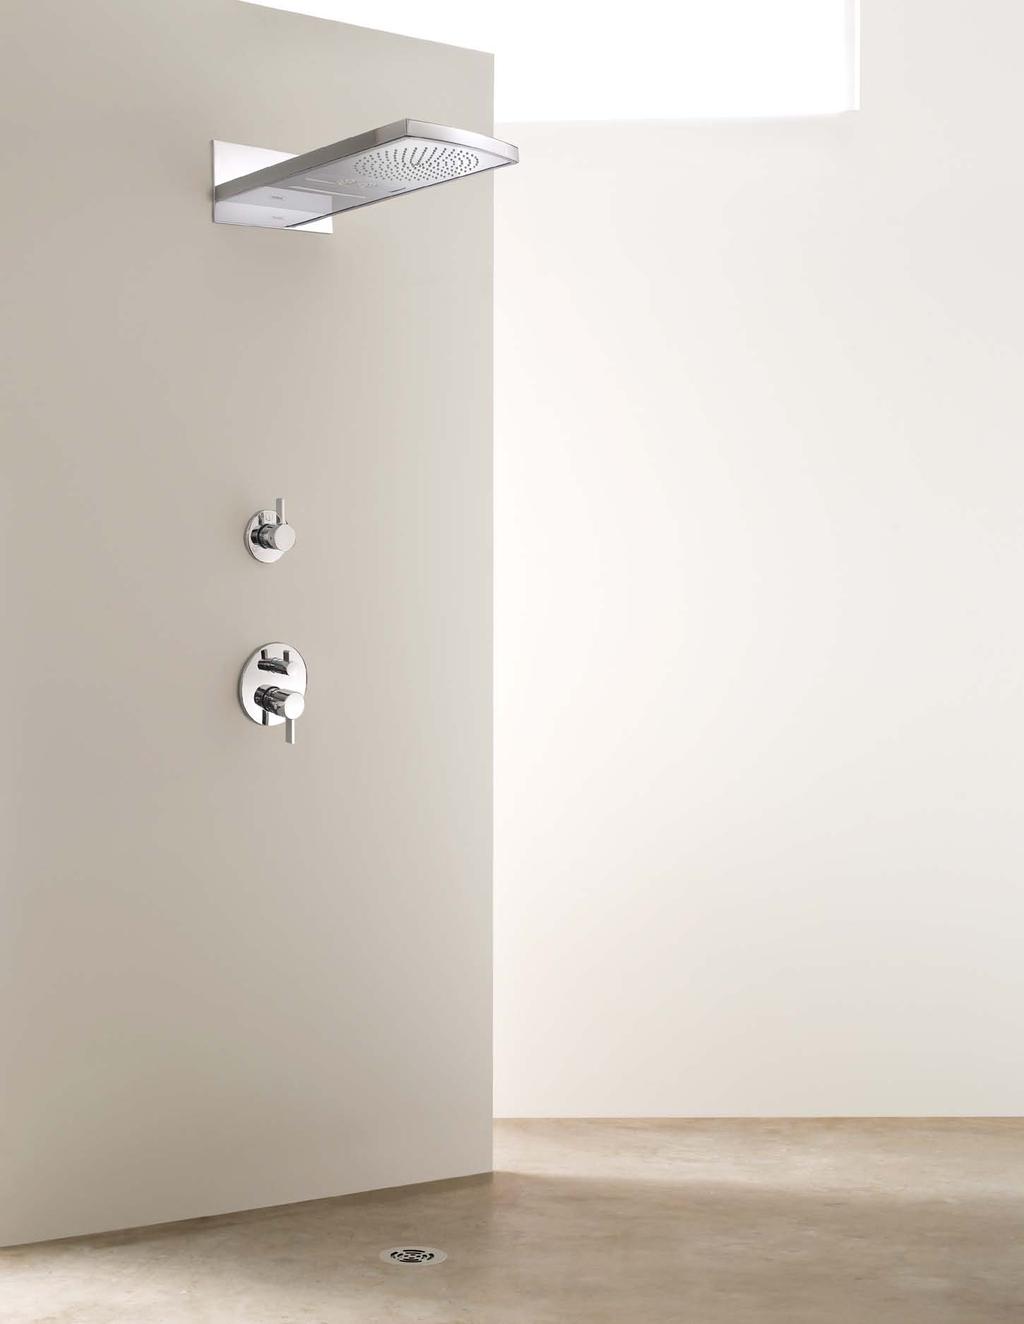 Raindance Rainfall AIR. Extraordinary shower fun, simple installation. Experience water in all its original magnificence with three unique shower functions: Rain AIR, Whirl, and Rainflow.